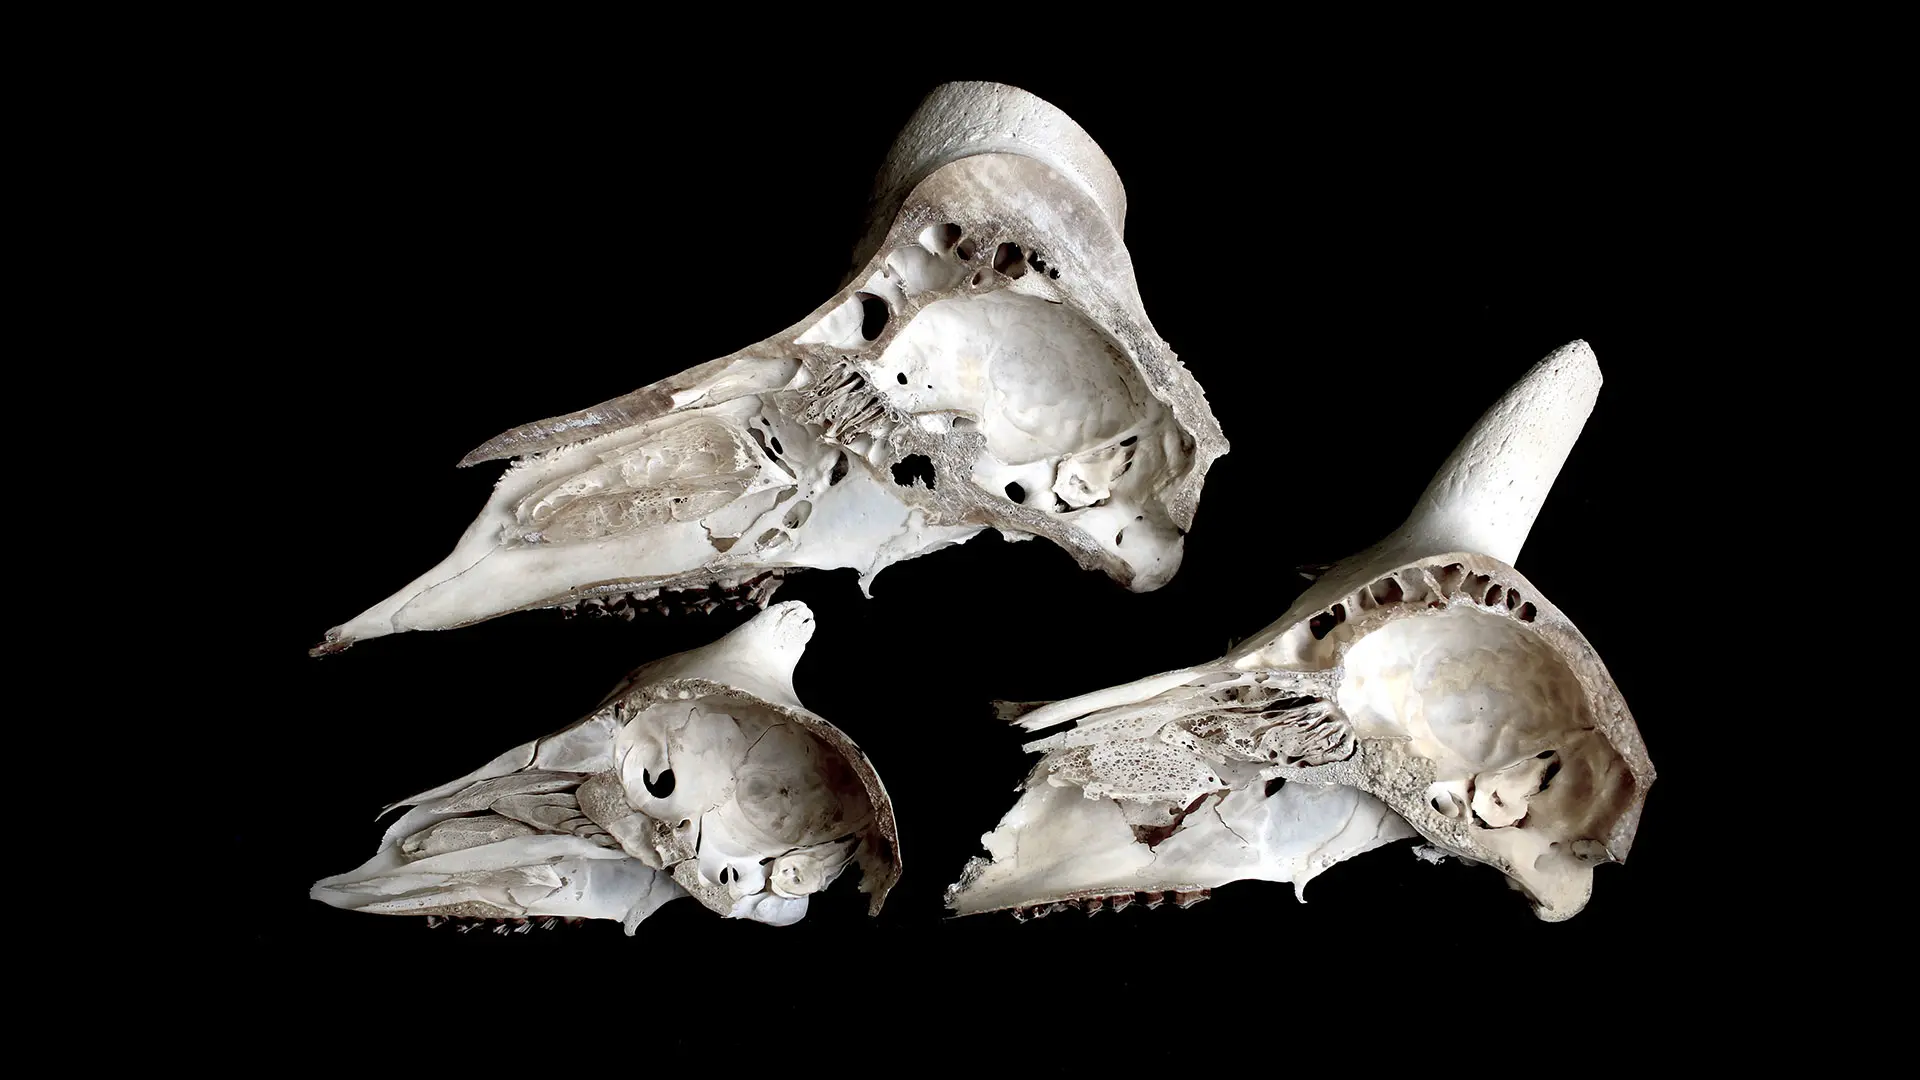 An ontogenetic series of bisected male, female, and juvenile bighorn sheep (Ovis canadensis) skulls, exposing the braincase. Credit: Nicole Ackermans, PhD, from the labs of Patrick Hof, PhD, and Joy Reidenberg, PhD 



